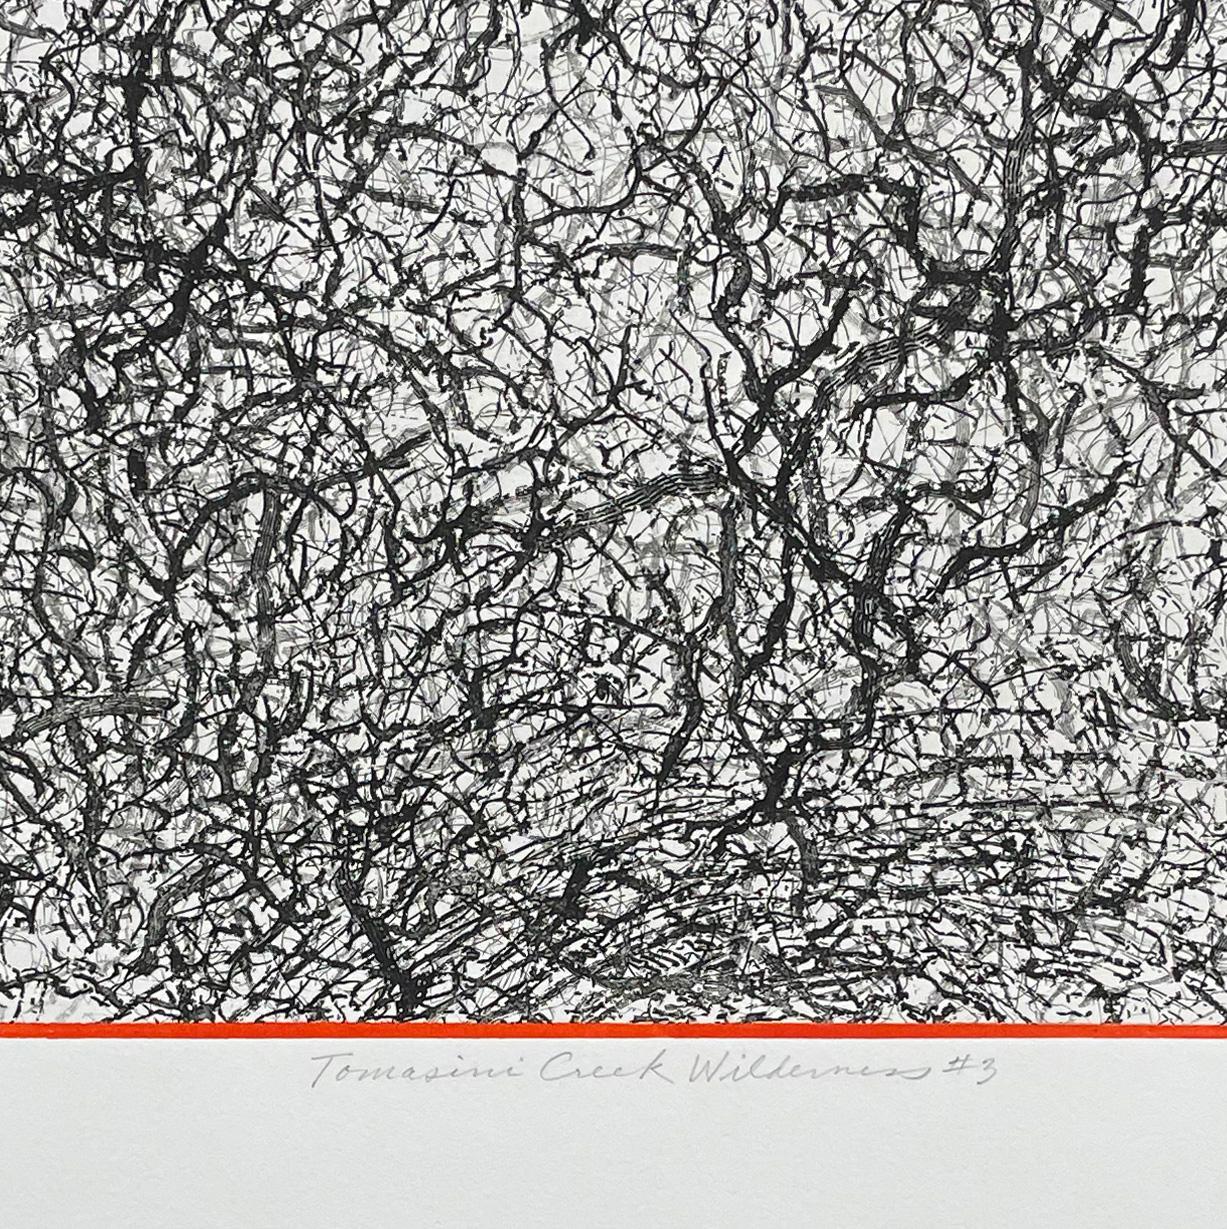 
Signed, titled and numbered from the edition of 7. Black and white abstract etching, from a series inspired by ground cover and vegetation in the Point Reyes, California area.

Charles Eckart was born in Oakland, California and grew up in Yosemite